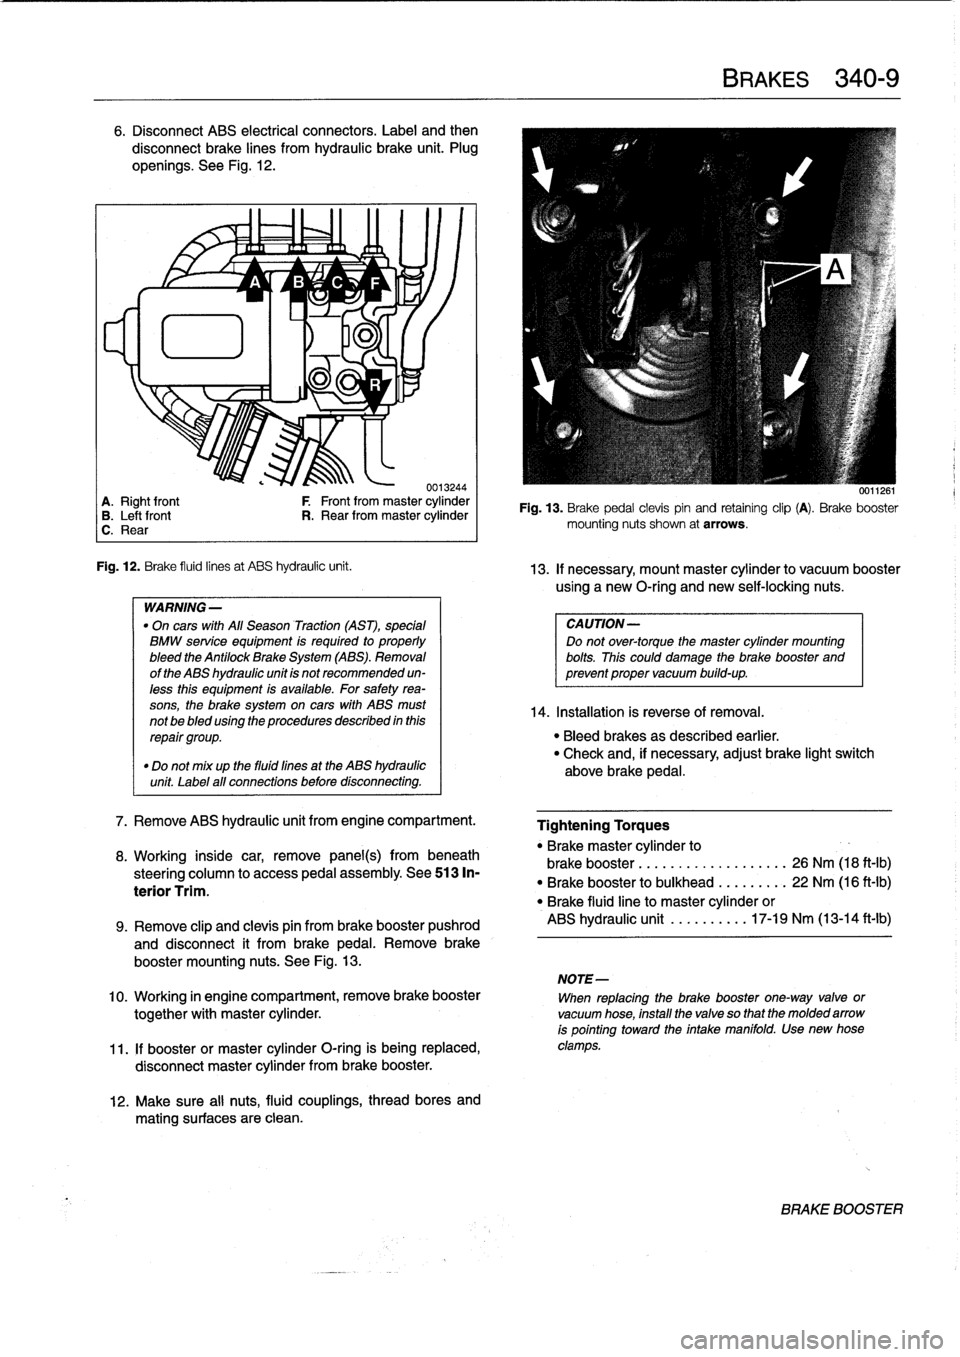 BMW 318i 1997 E36 Owners Manual 6
.
Disconnect
ABS
electrical
connectors
.
Label
and
then

disconnect
brake
lines
from
hydraulic
brake
unit
.
Plug

openíngs
.
See
Fig
.
12
.

~
~
A
1/
B
1v
C
~
F

lu
11
-ri
J
.

0013244
A
.
Right
f